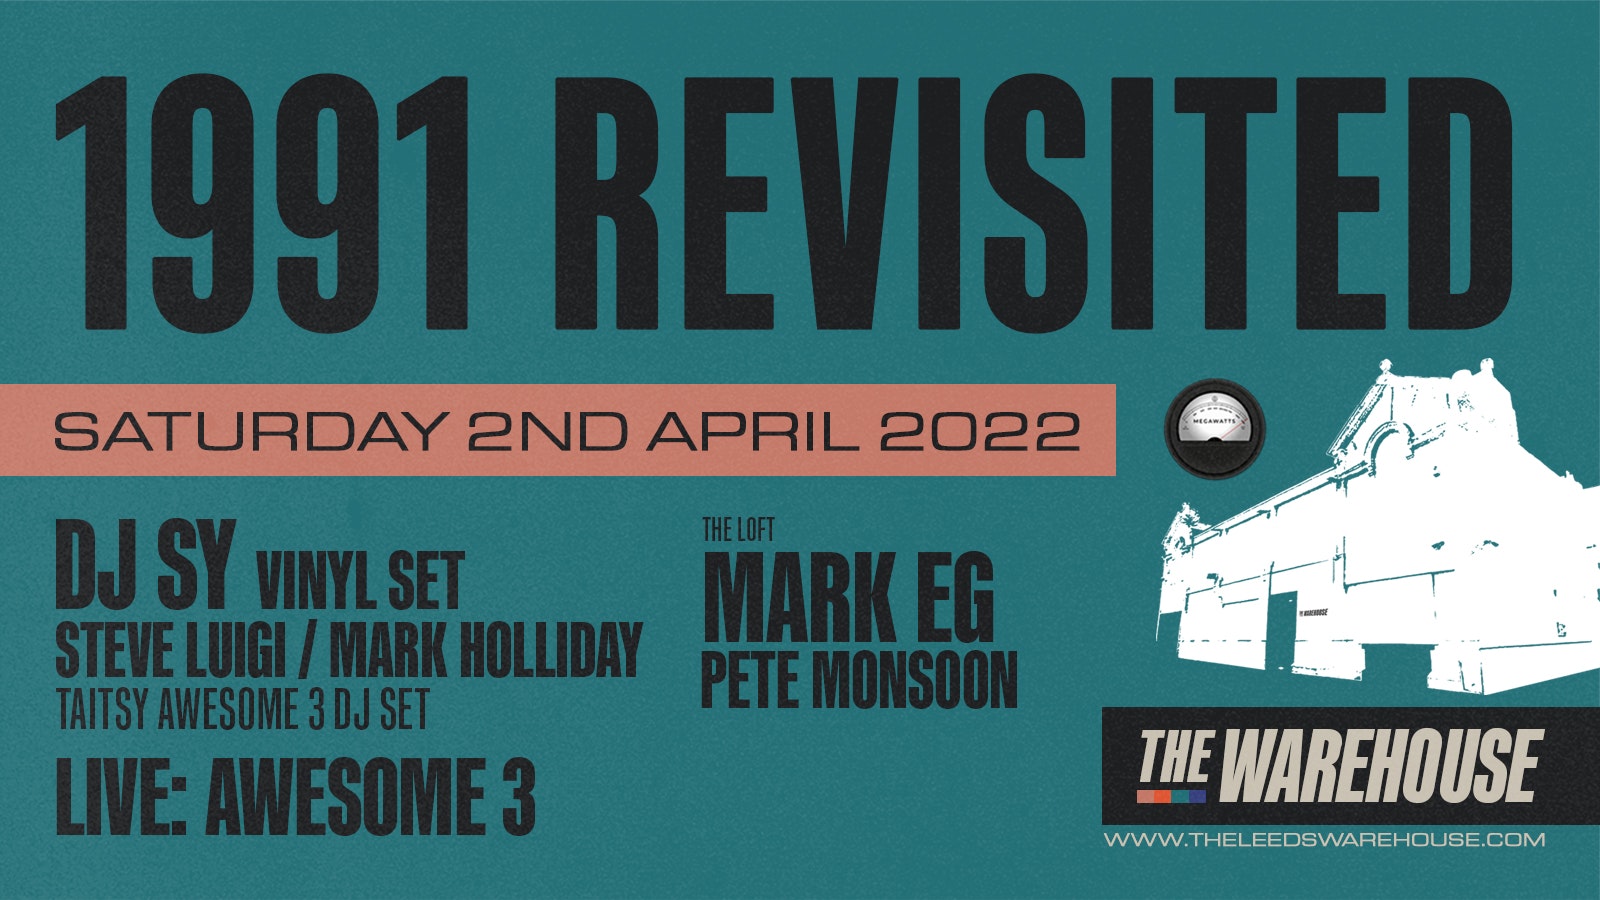 1991 Revisited – Live & Club